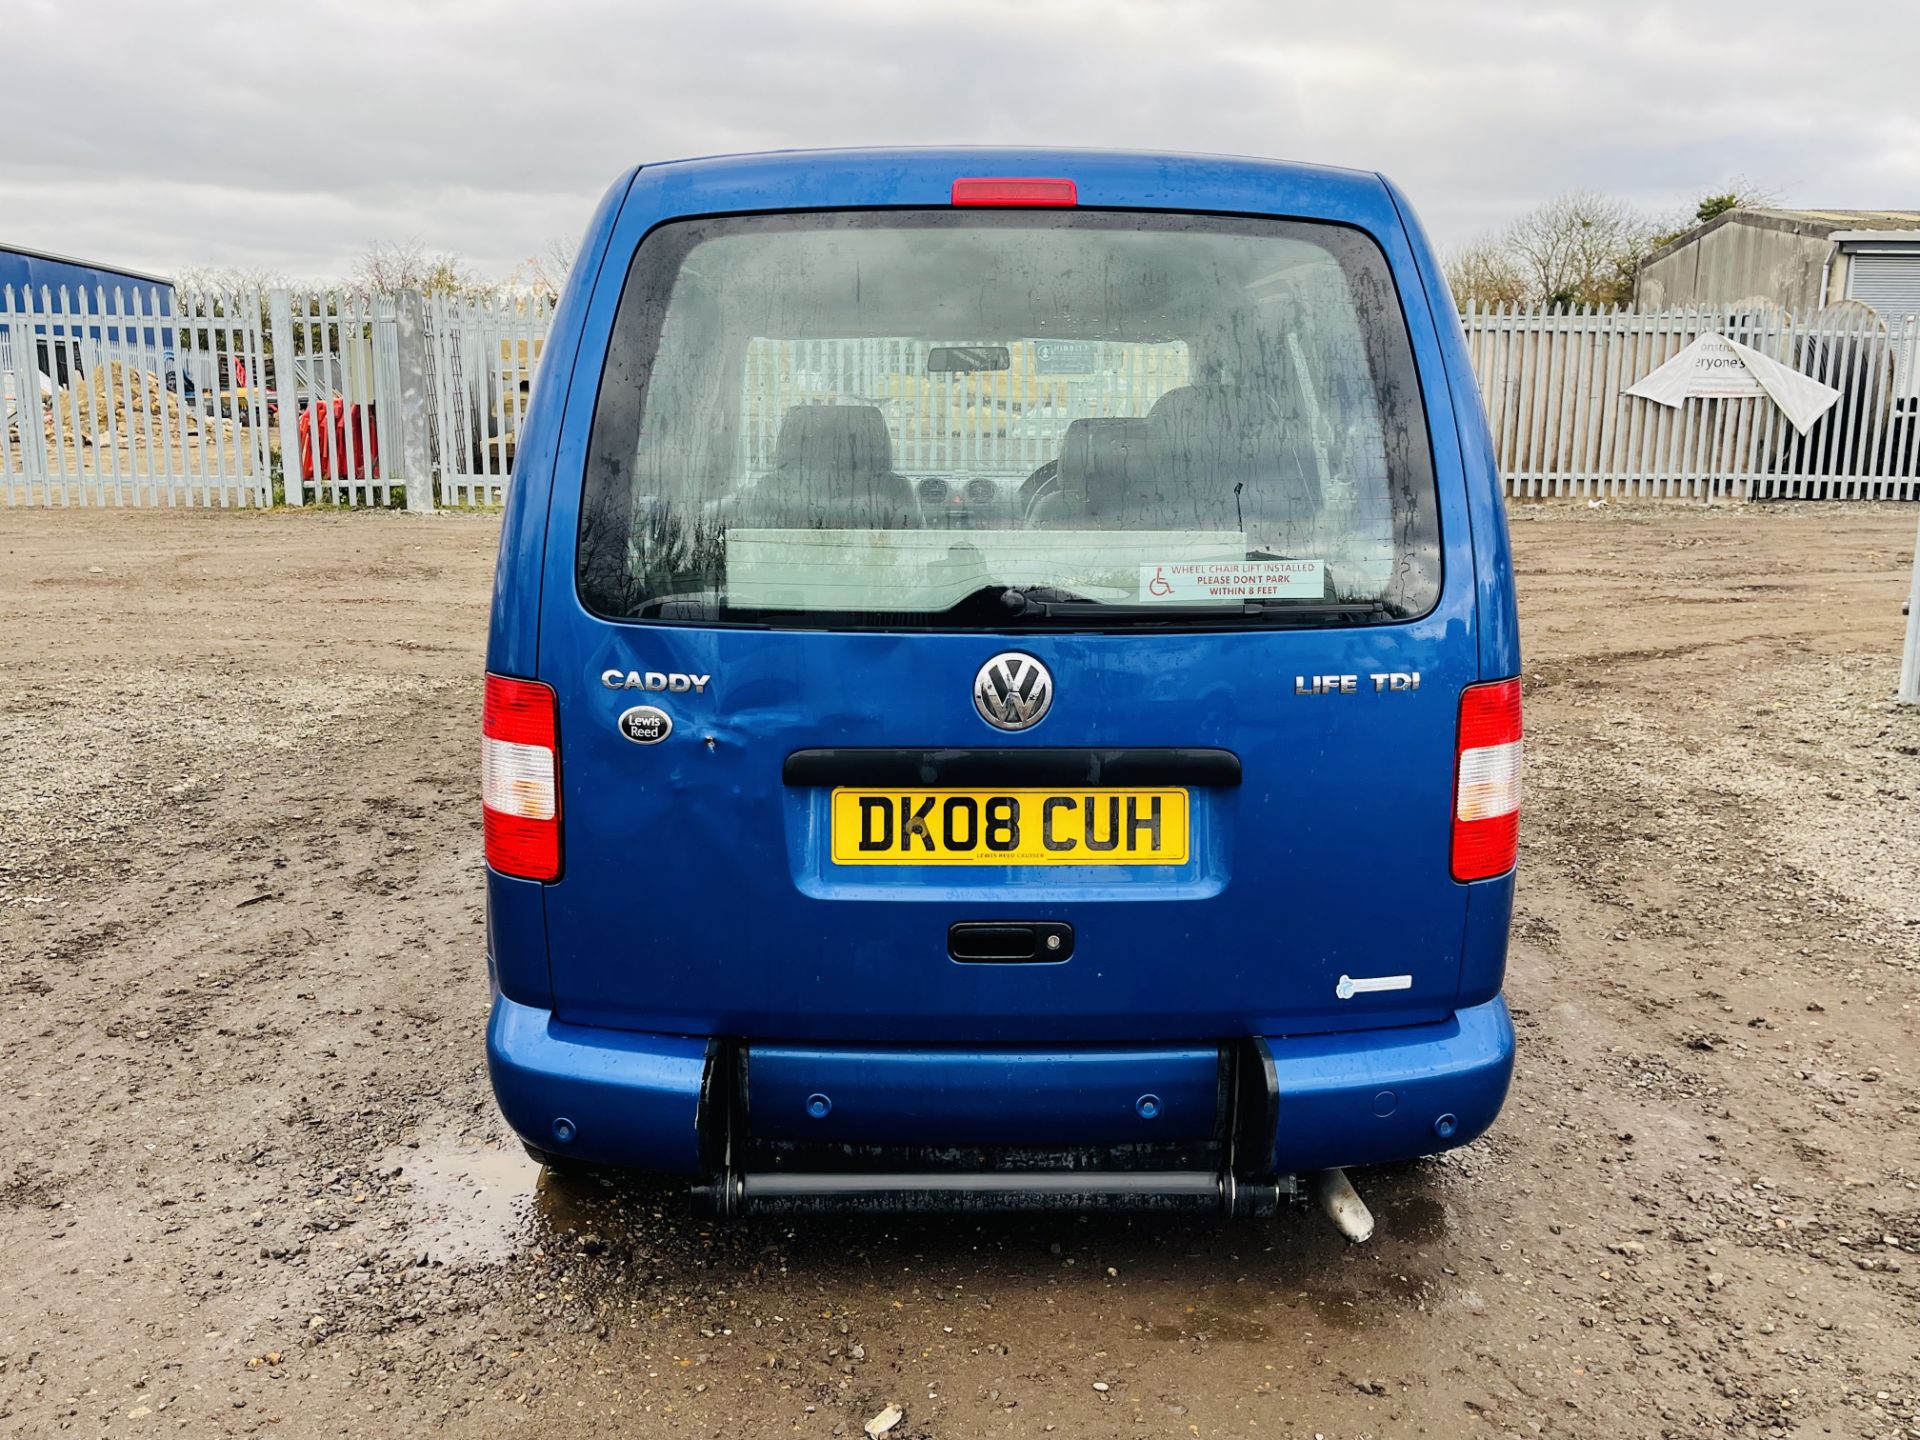 ** ON SALE ** Volkswagen Caddy Life 1.9 TDI DSG Auto 2008 '08 Reg'Air Con - Only Done 38k - - Image 13 of 24